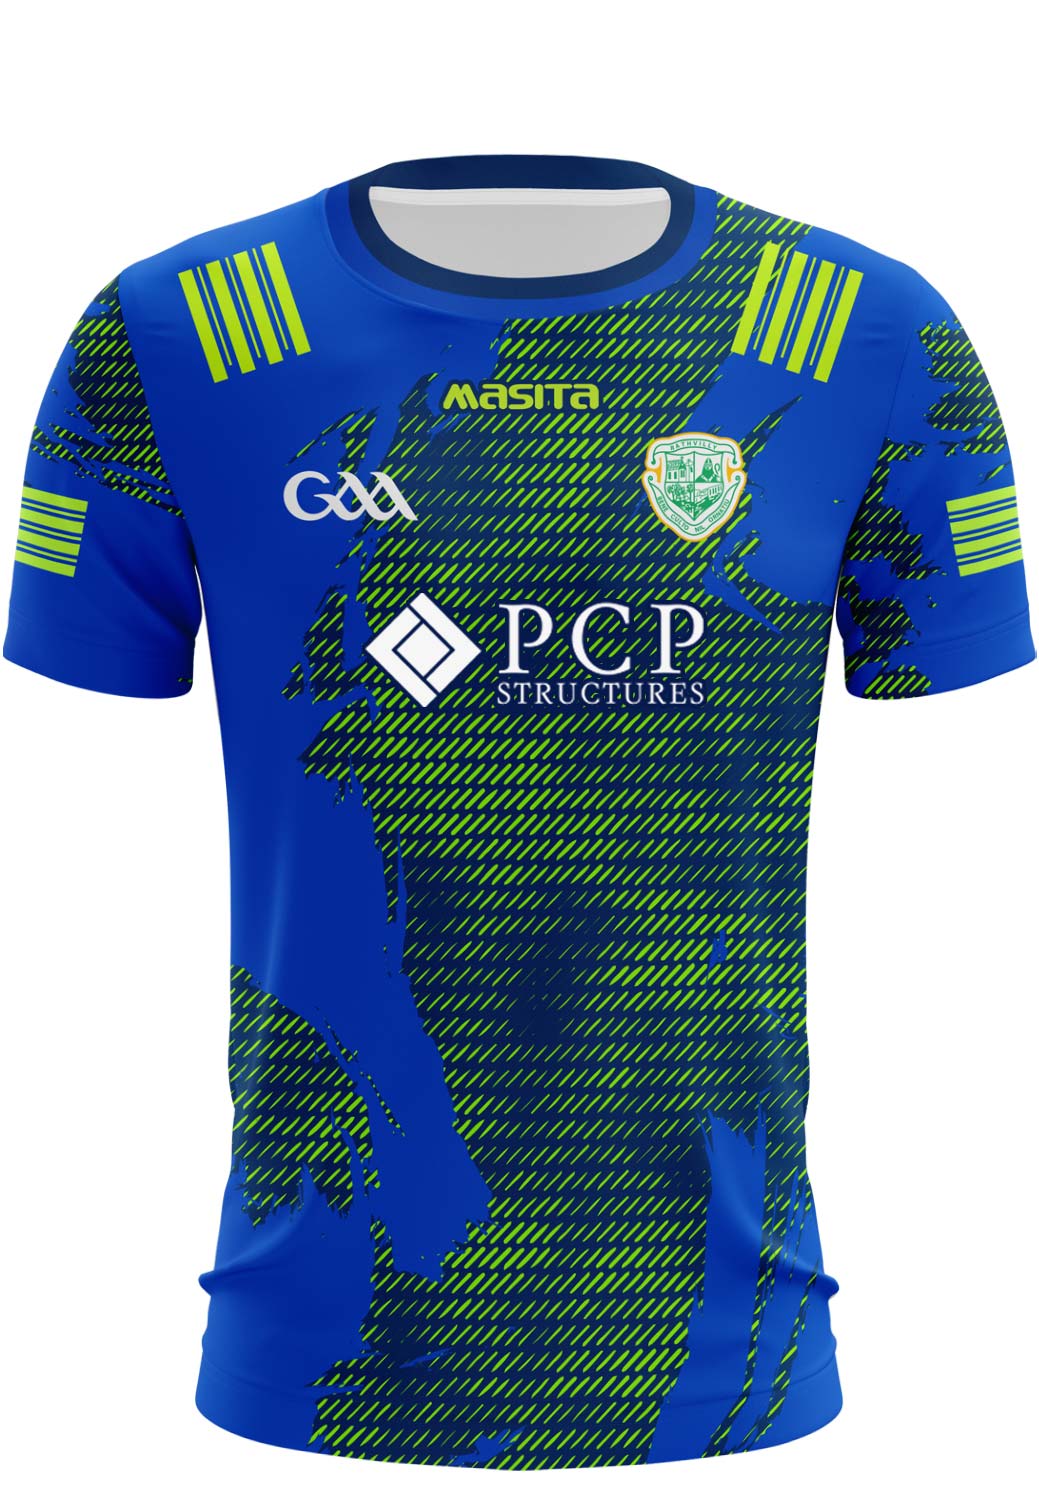 Rathvilly GAA Boa Style Training Jersey Player Fit Adult